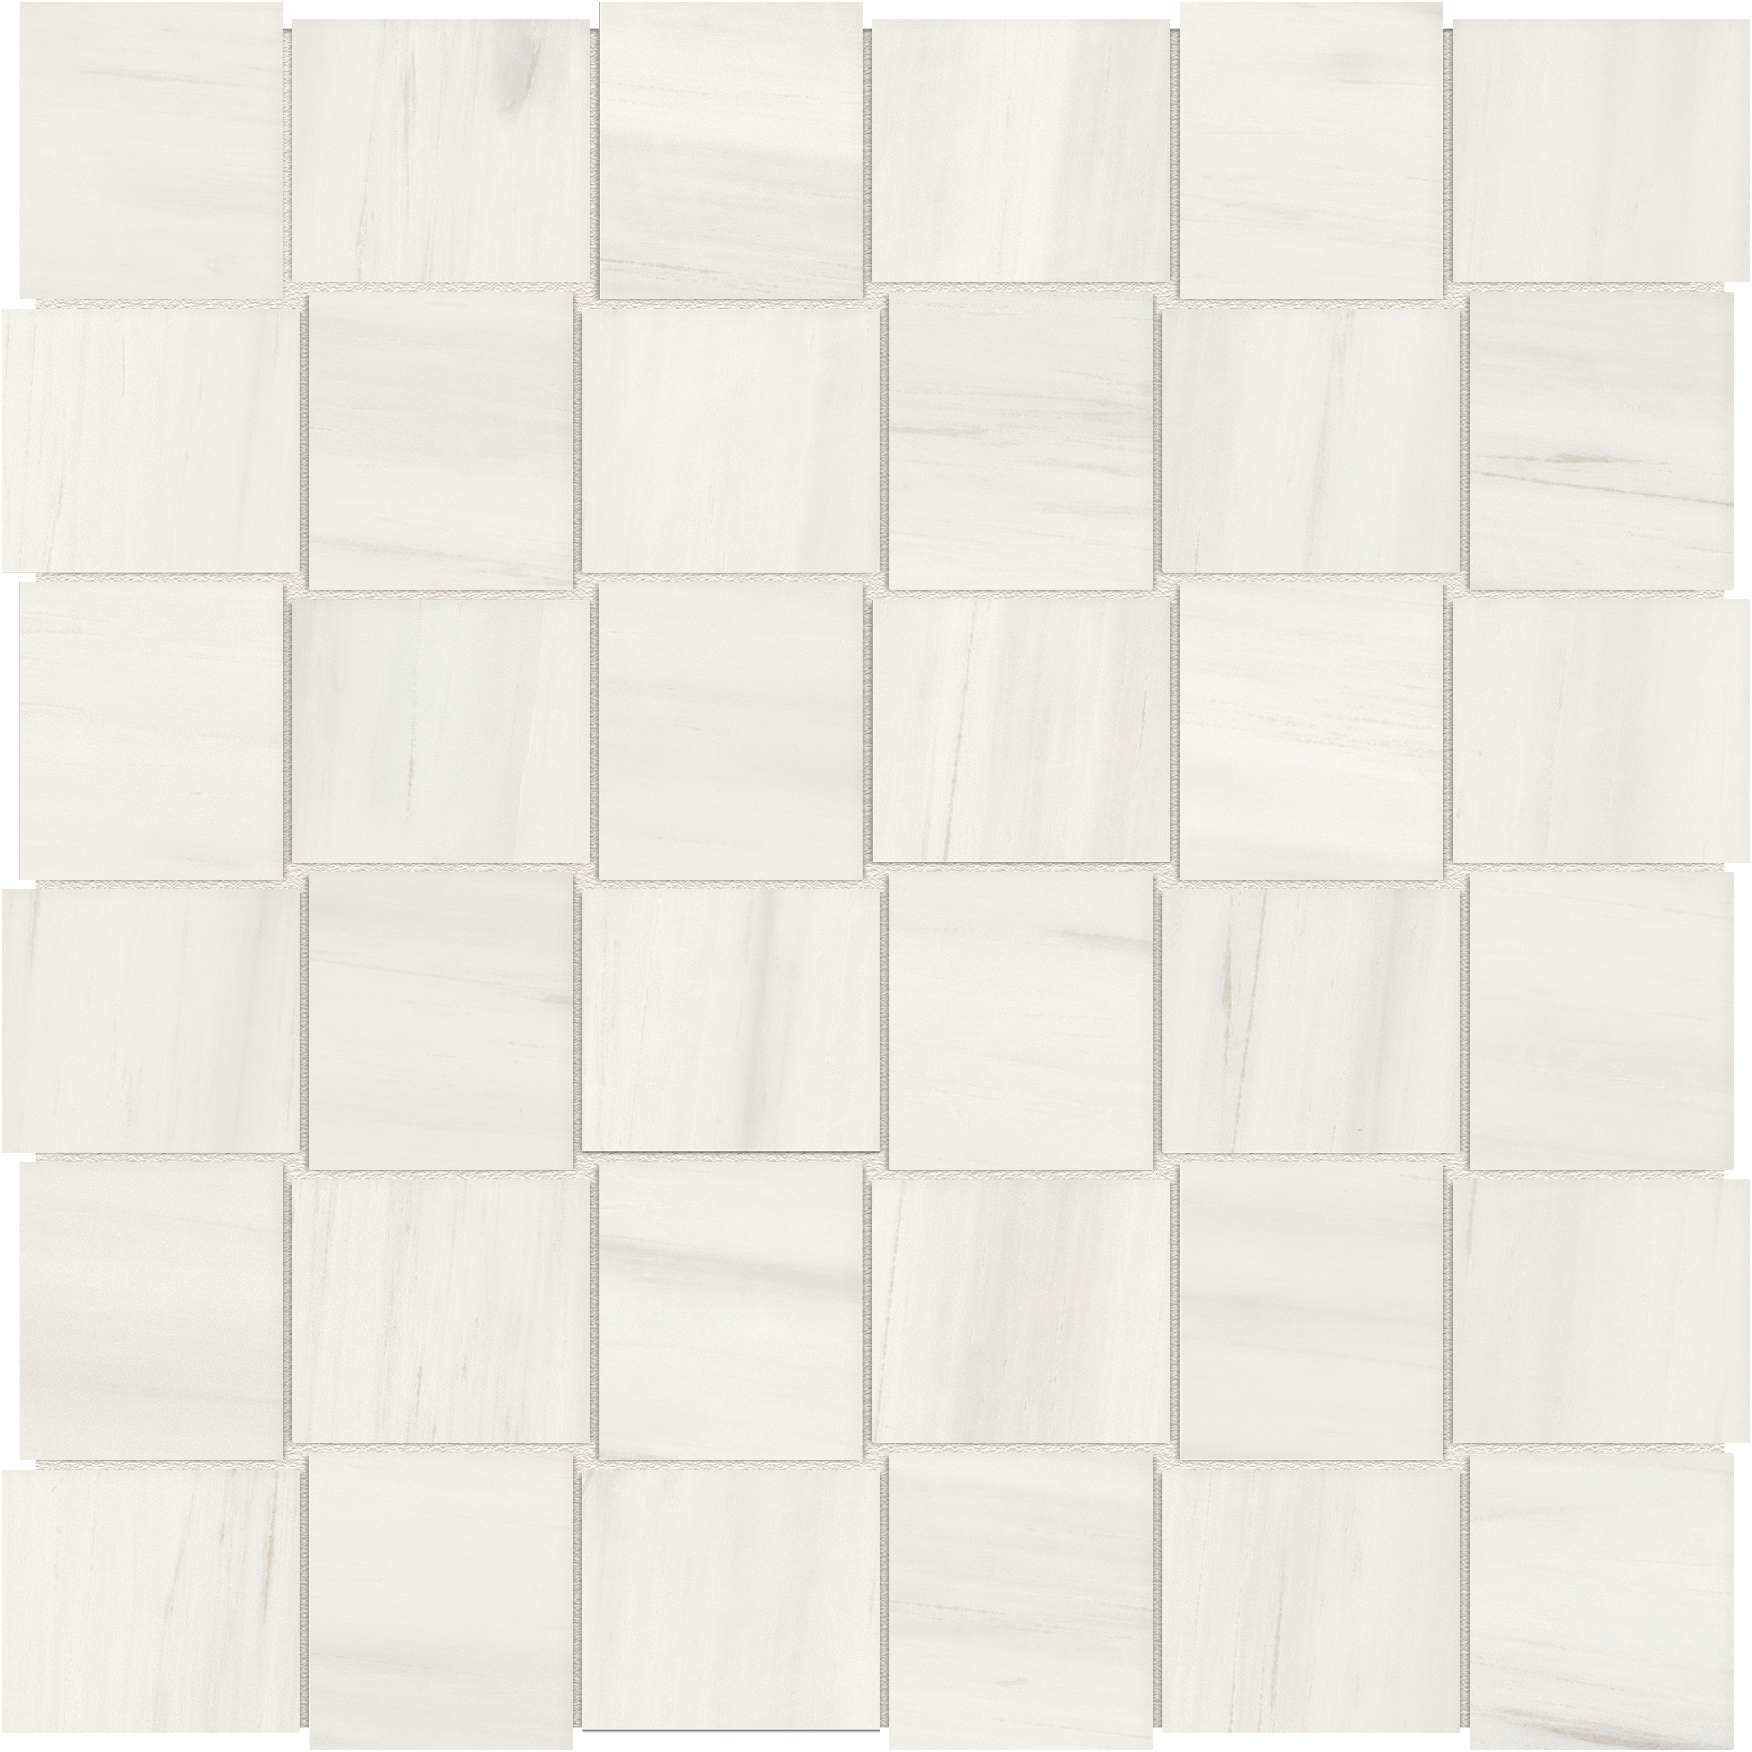 suave bianco basketweave 2x2-inch pattern glazed porcelain mosaic from mayfair anatolia collection distributed by surface group international polished finish straight edge edge mesh shape